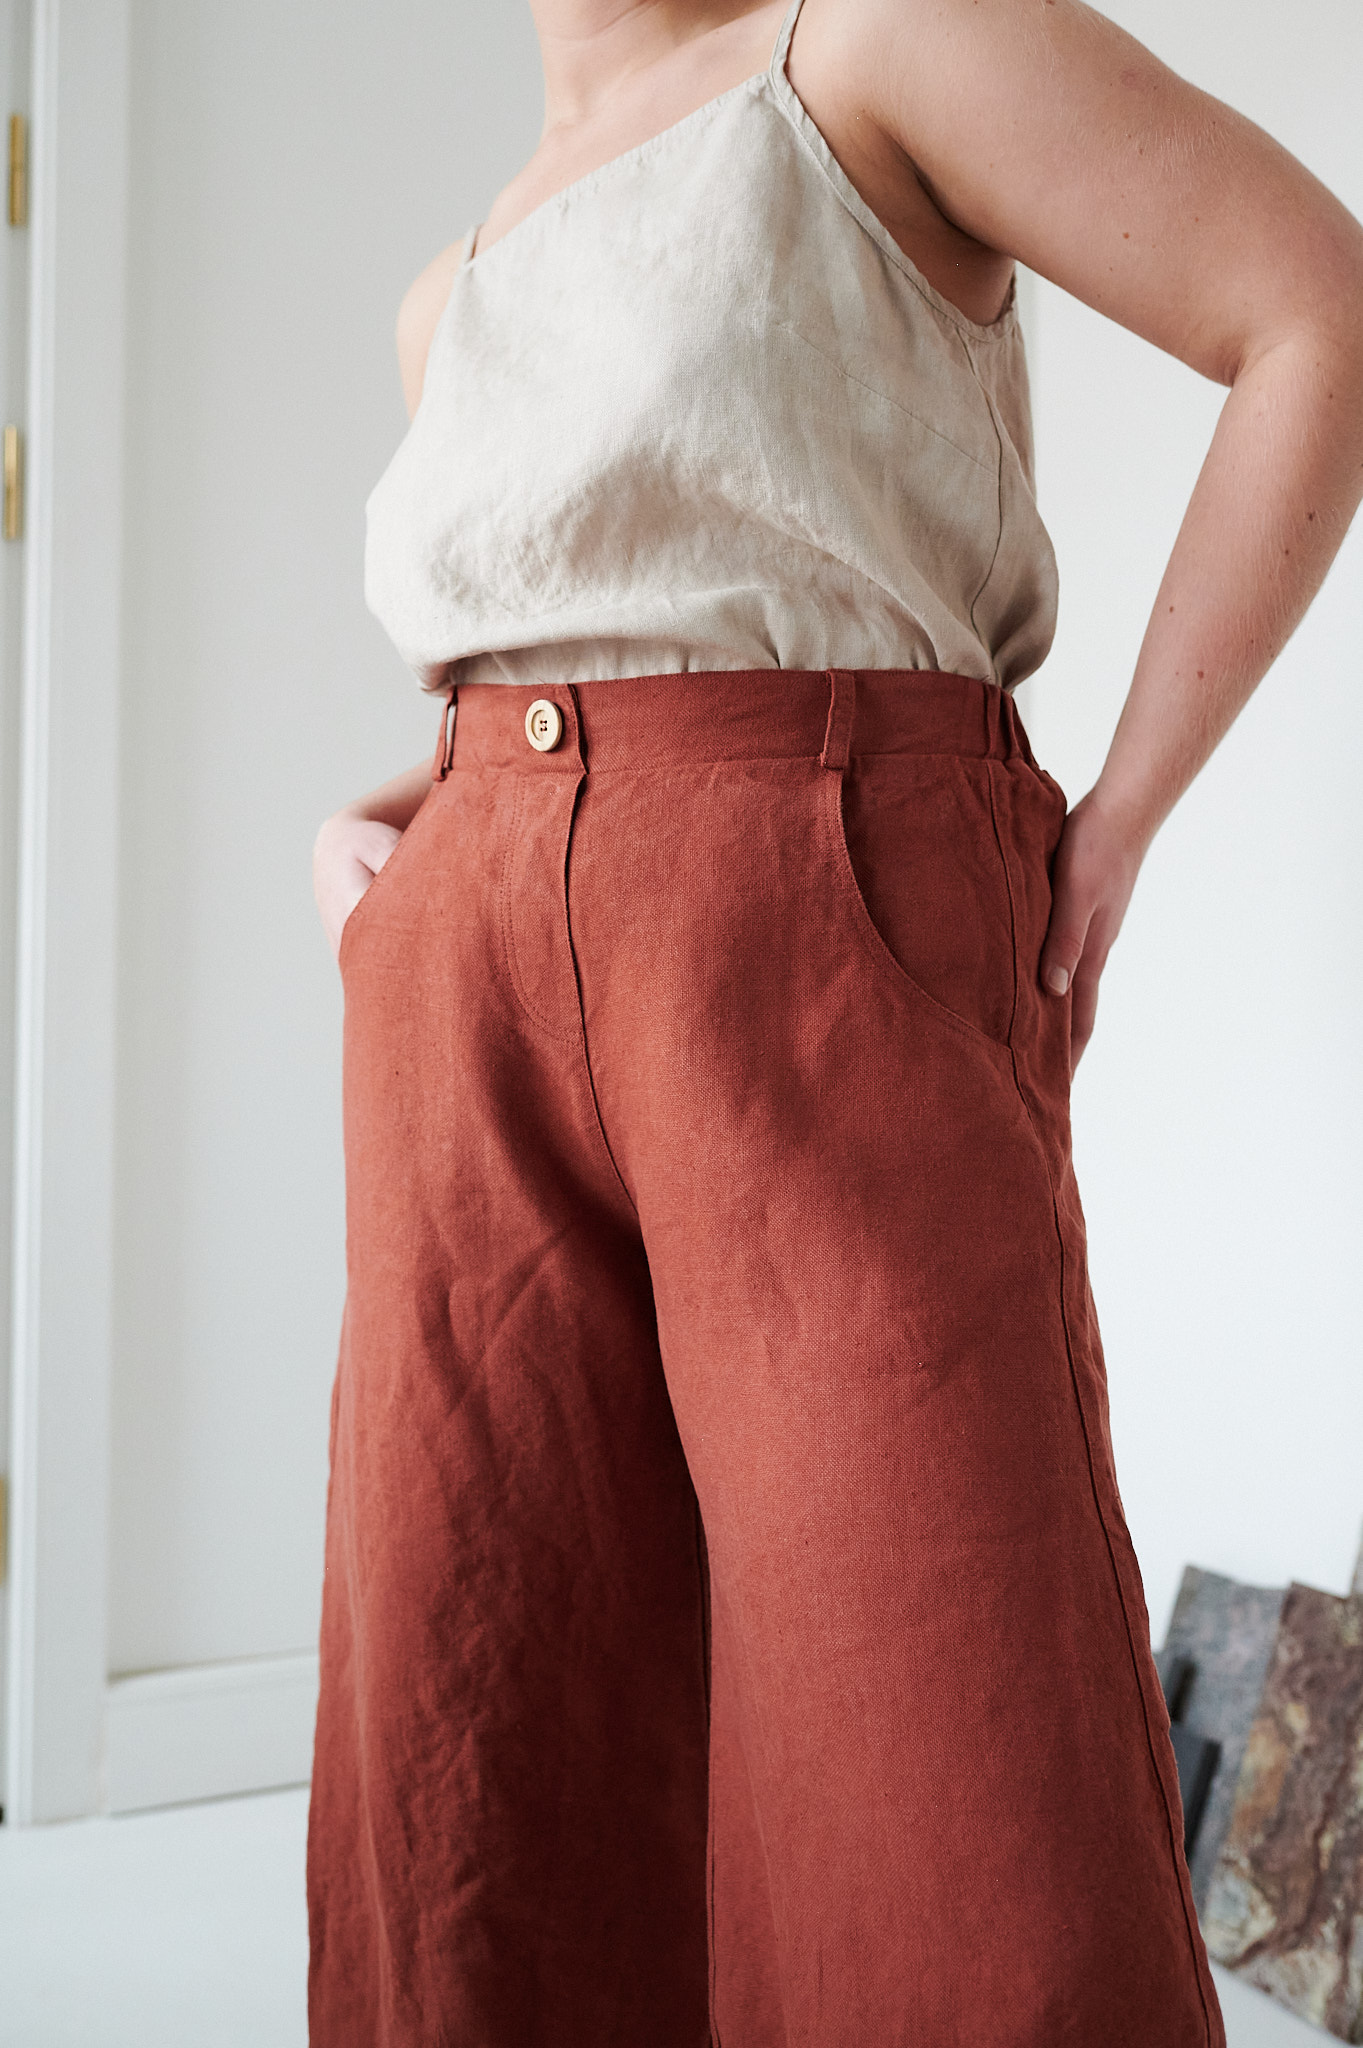 Pockets of the brown heavy linen trousers